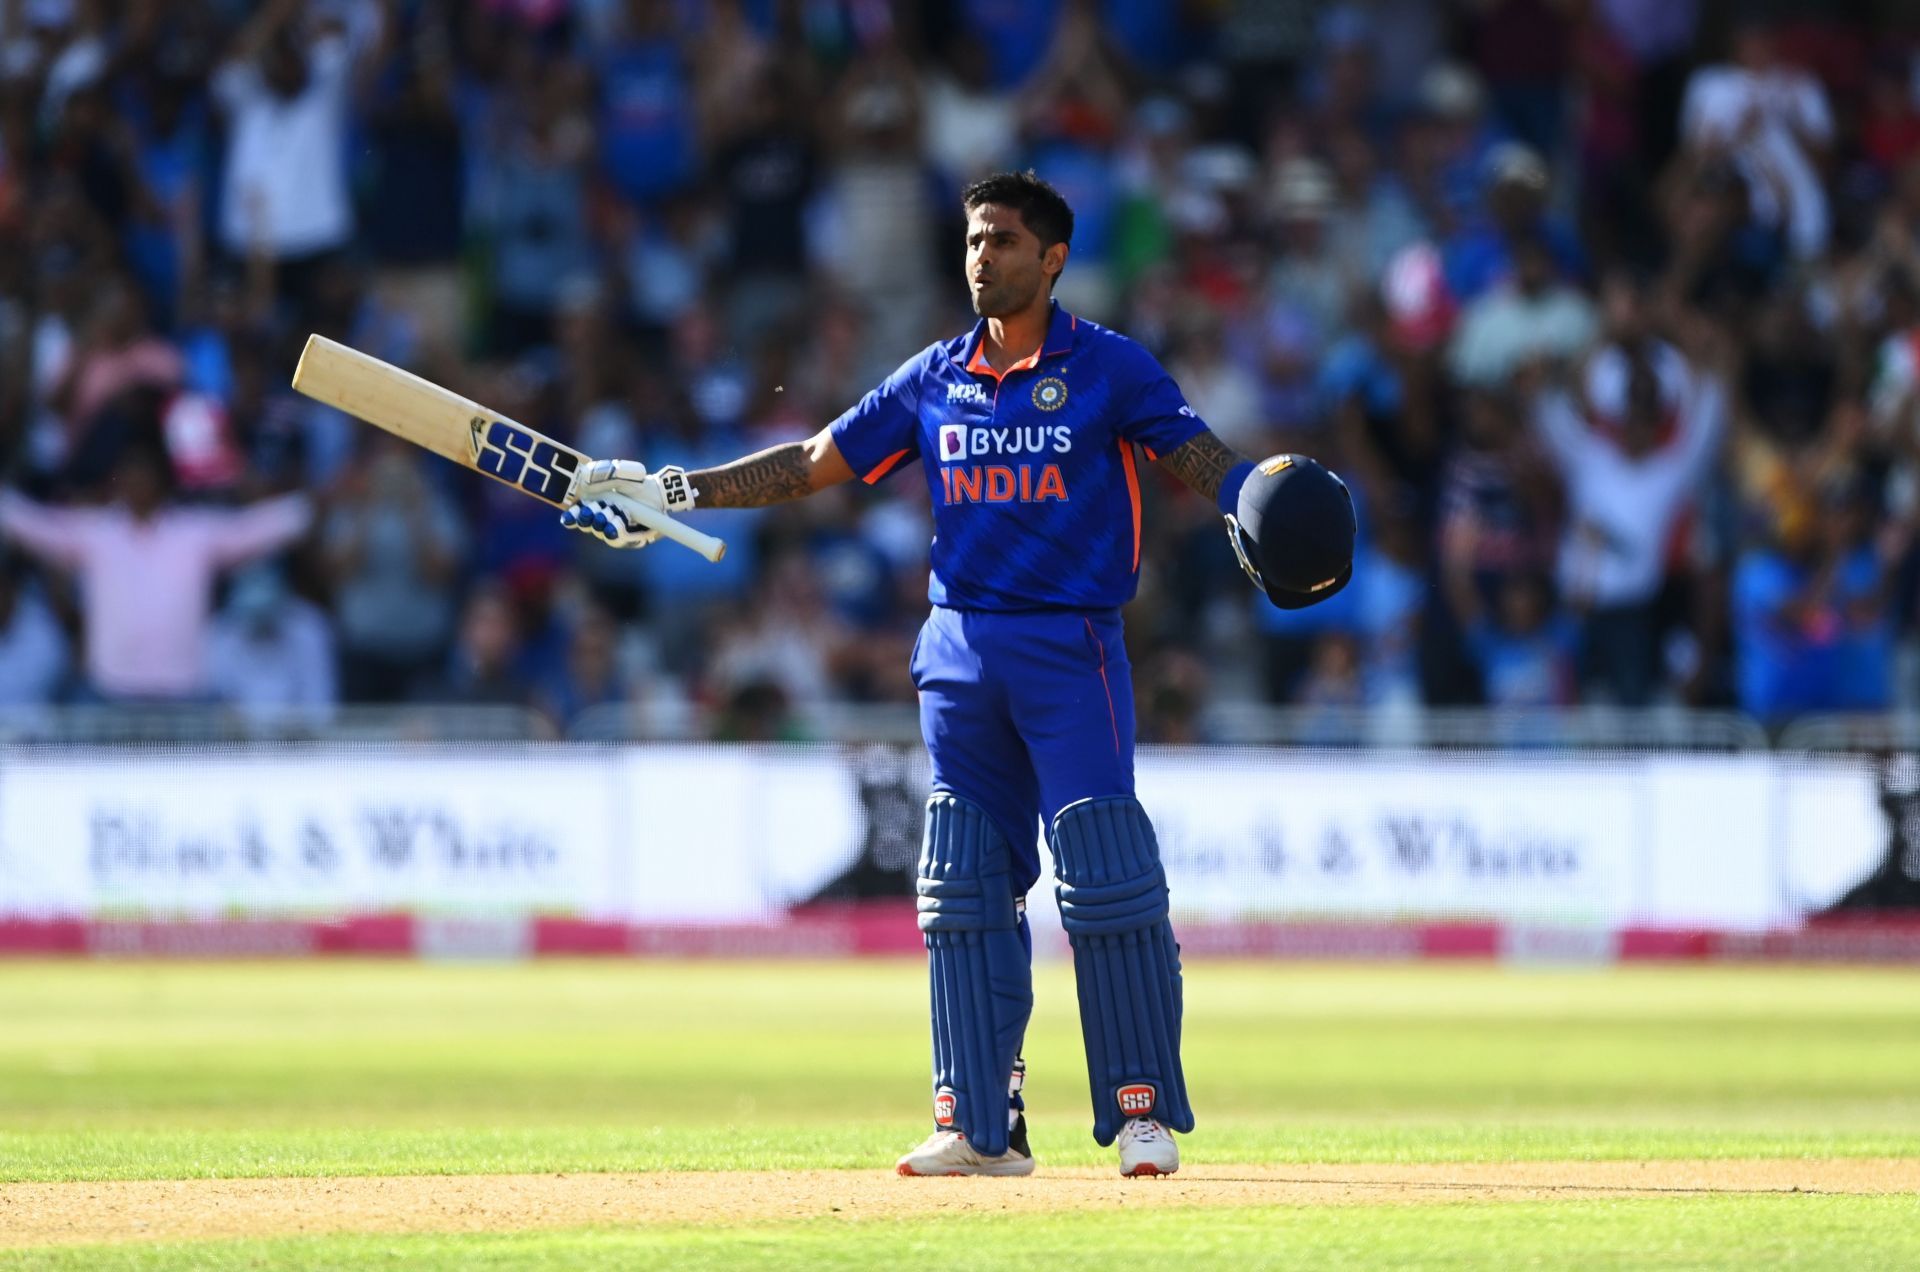 Suryakumar Yadav played a scintillating knock in the final T20I against England